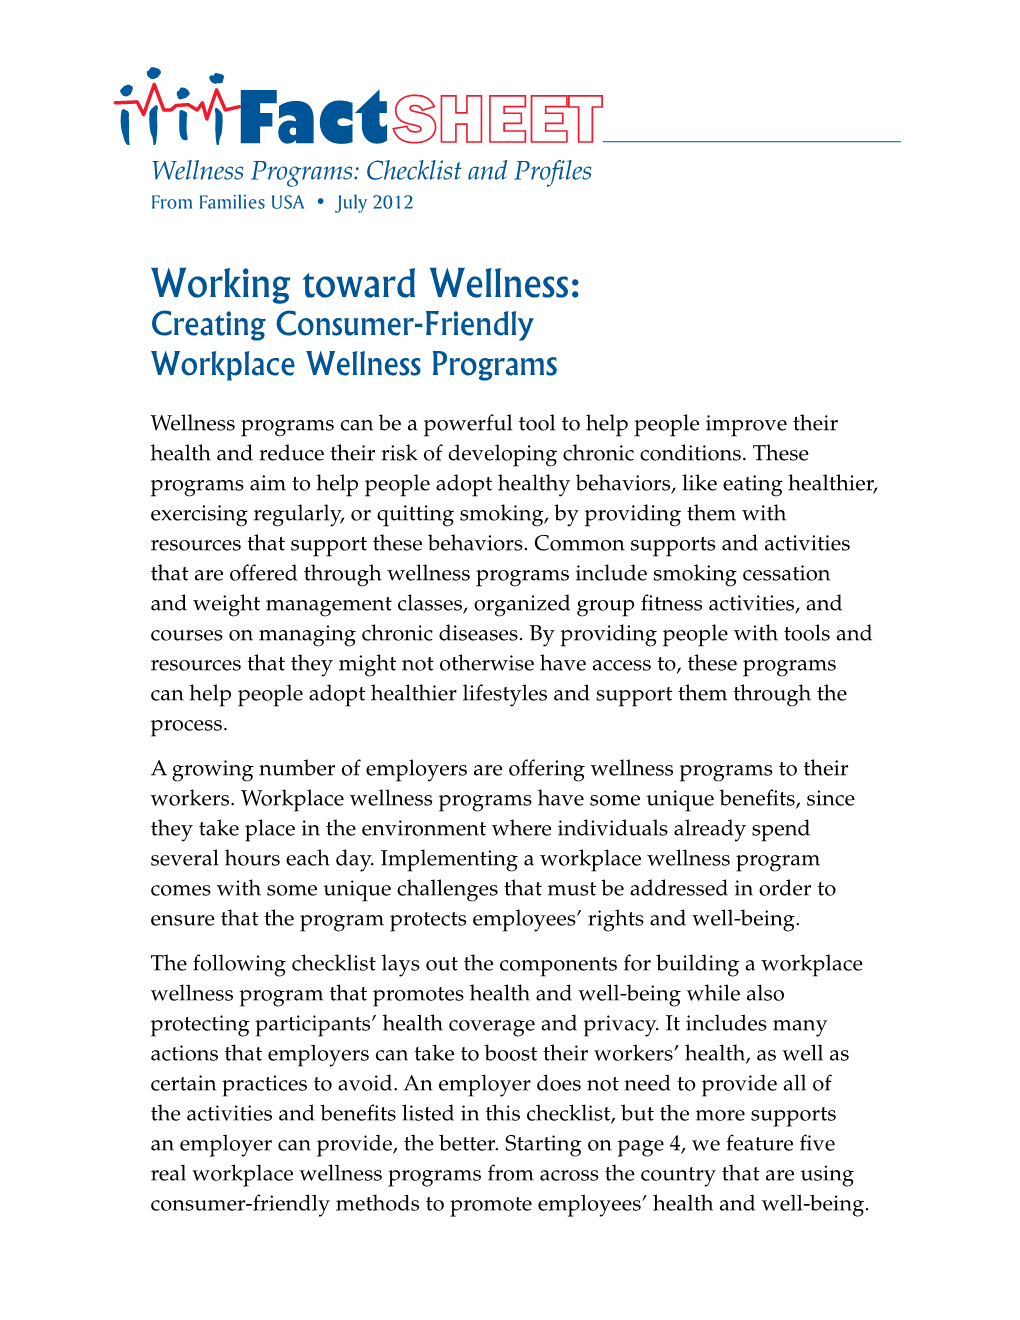 Wellness Programs: Checklist and Profiles from Families USA • July 2012